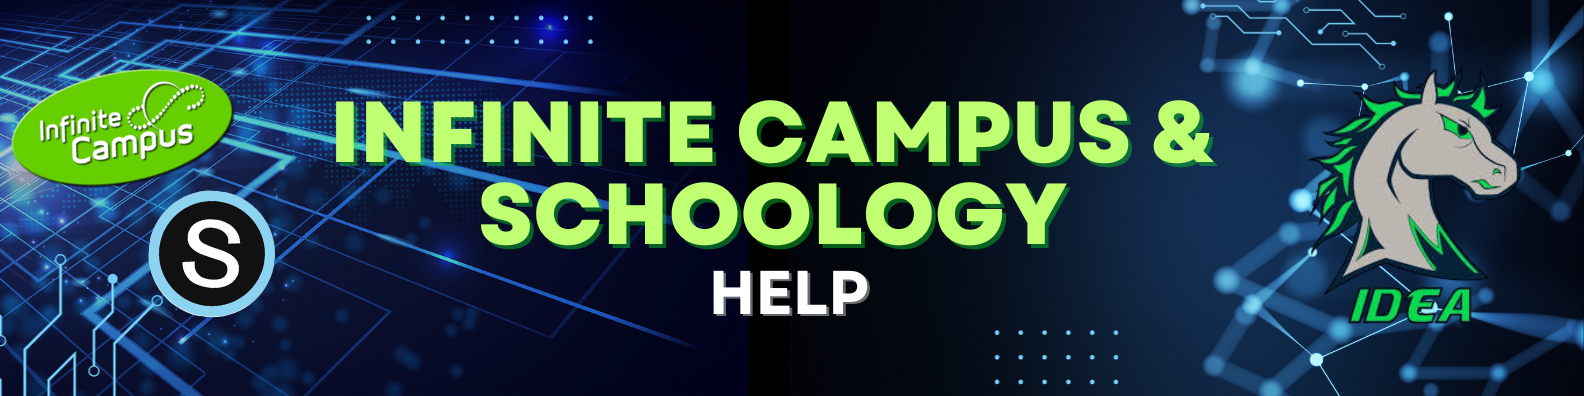 infinite campus and schoology help page